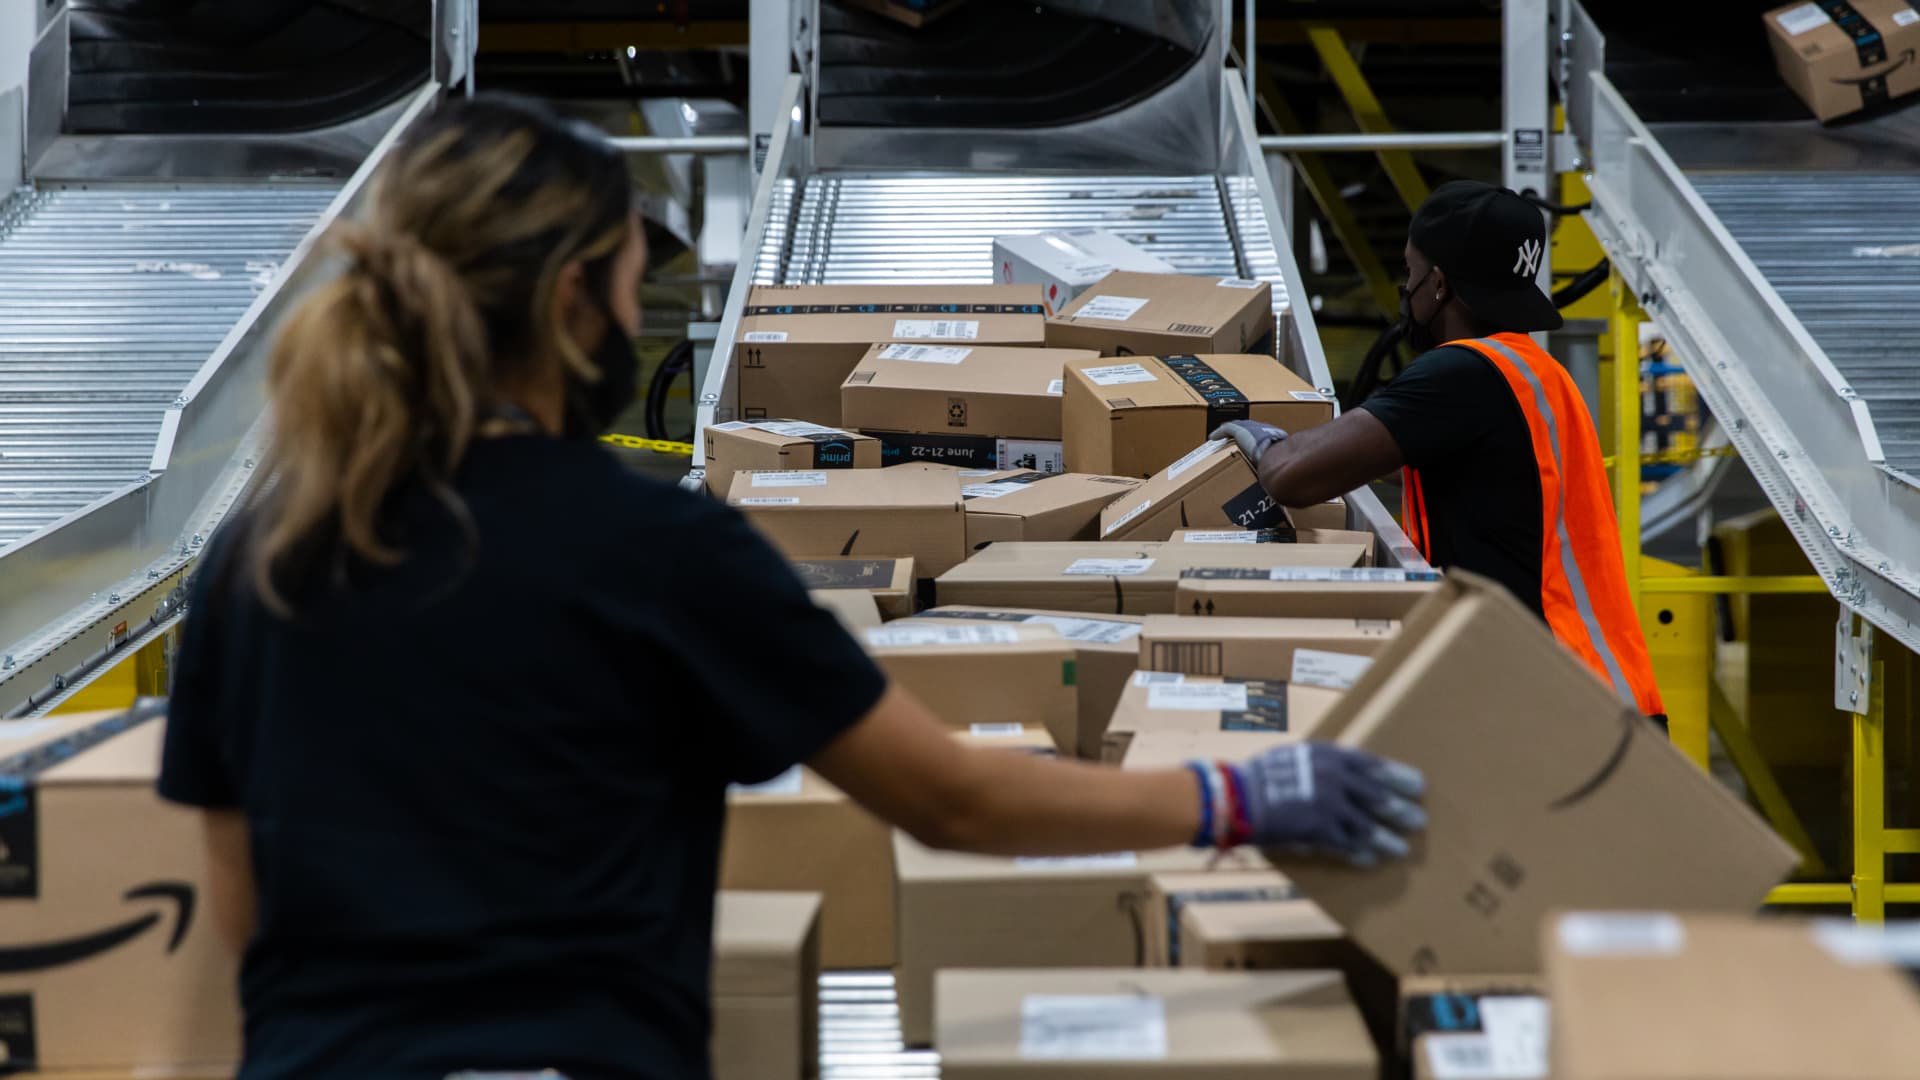 Amazon's second Prime Day sale will take place Oct. 11-12 - CNBC